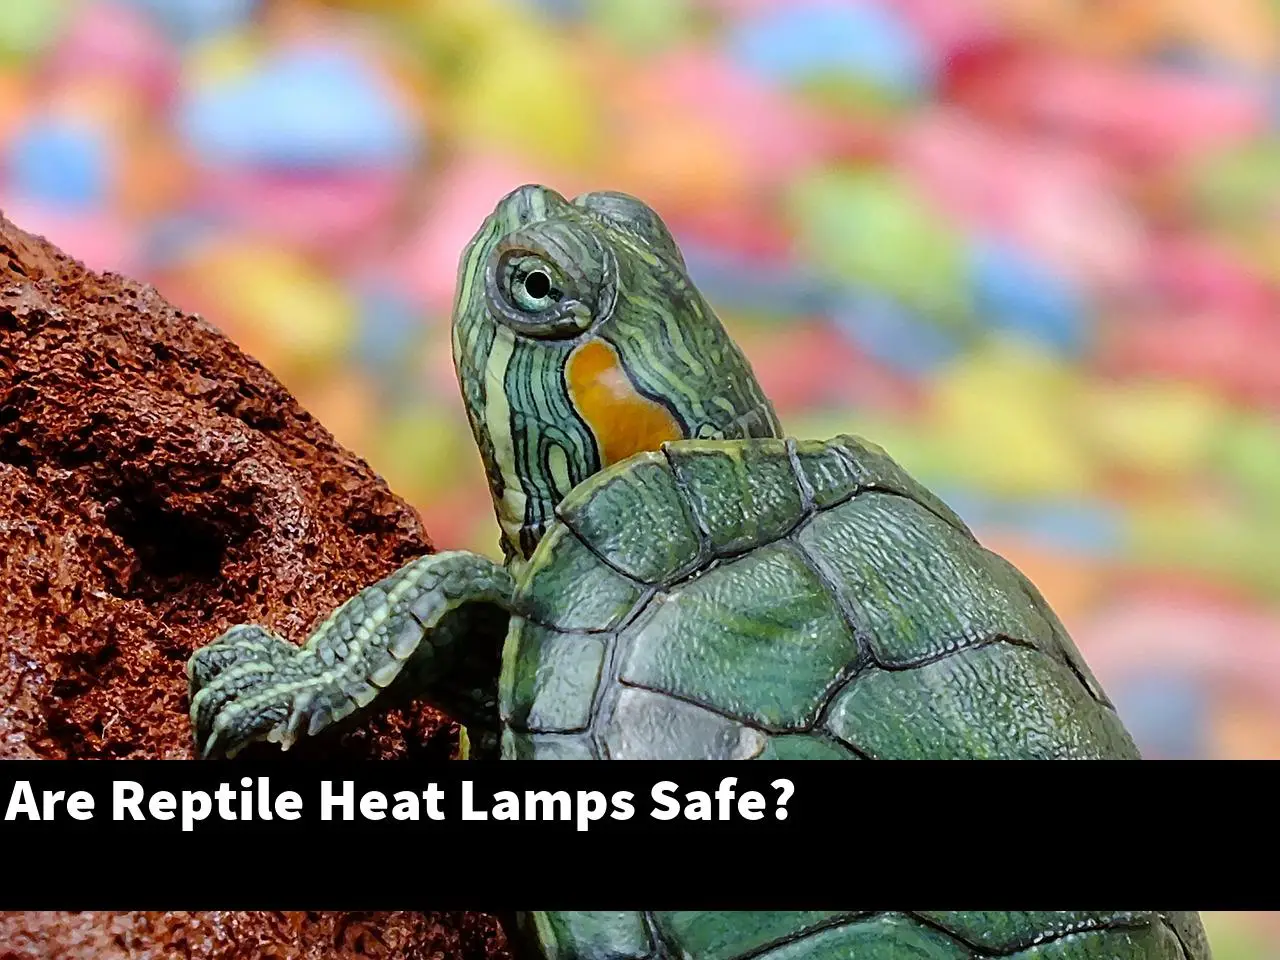 Are Reptile Heat Lamps Safe?